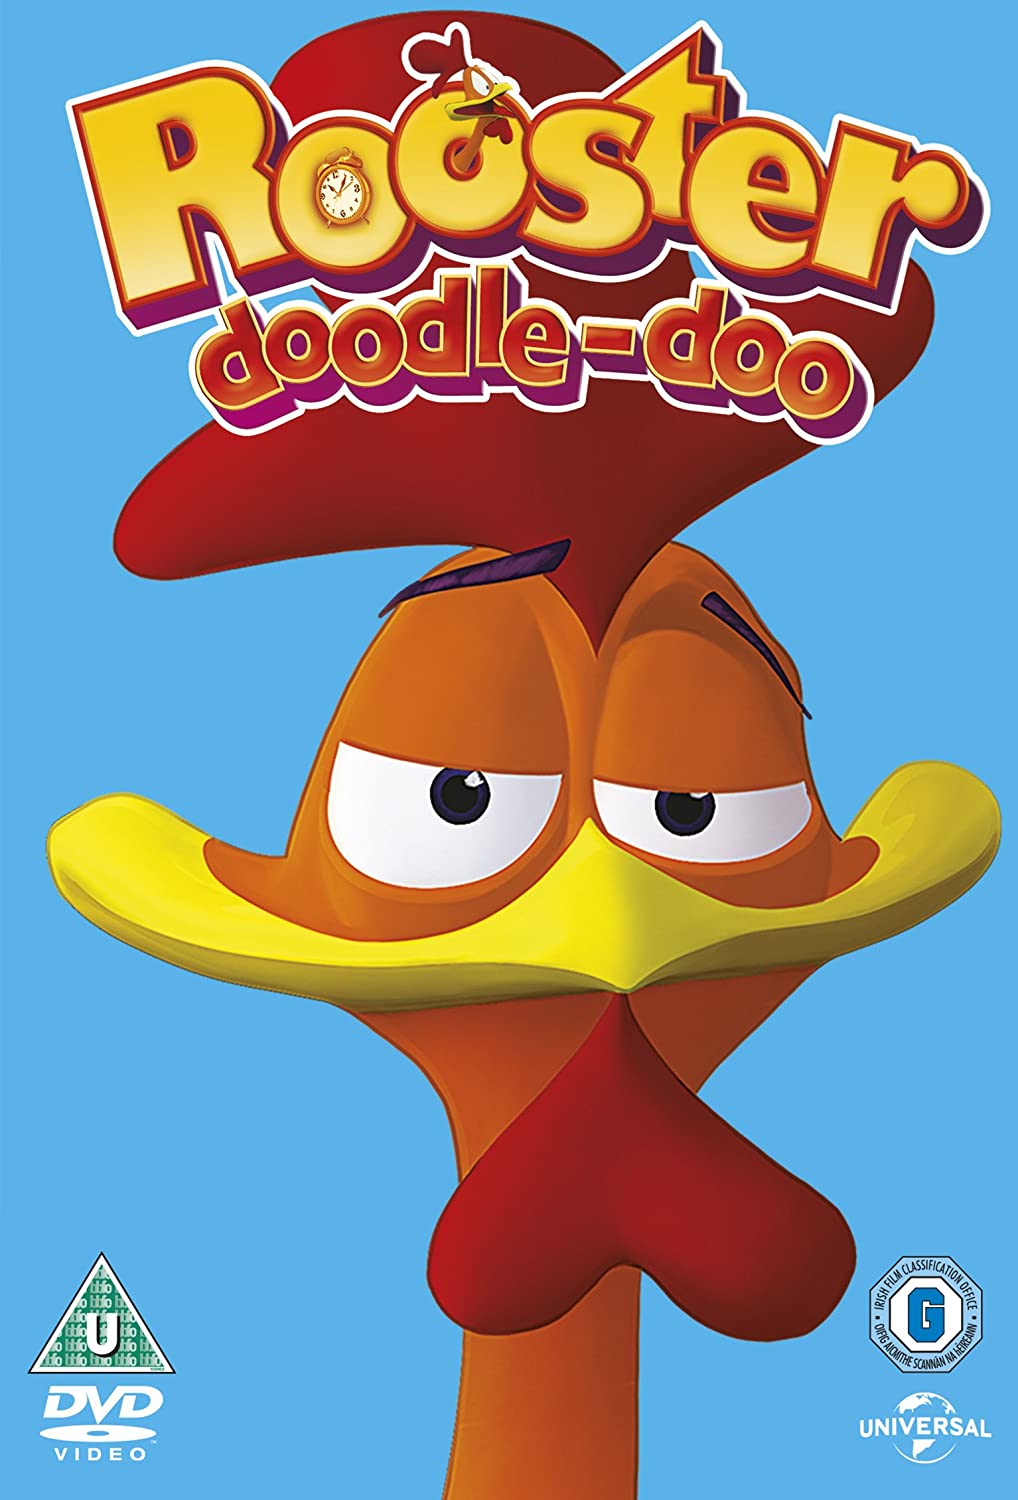 Rooster Doodle-Doo - Animation [DVD]